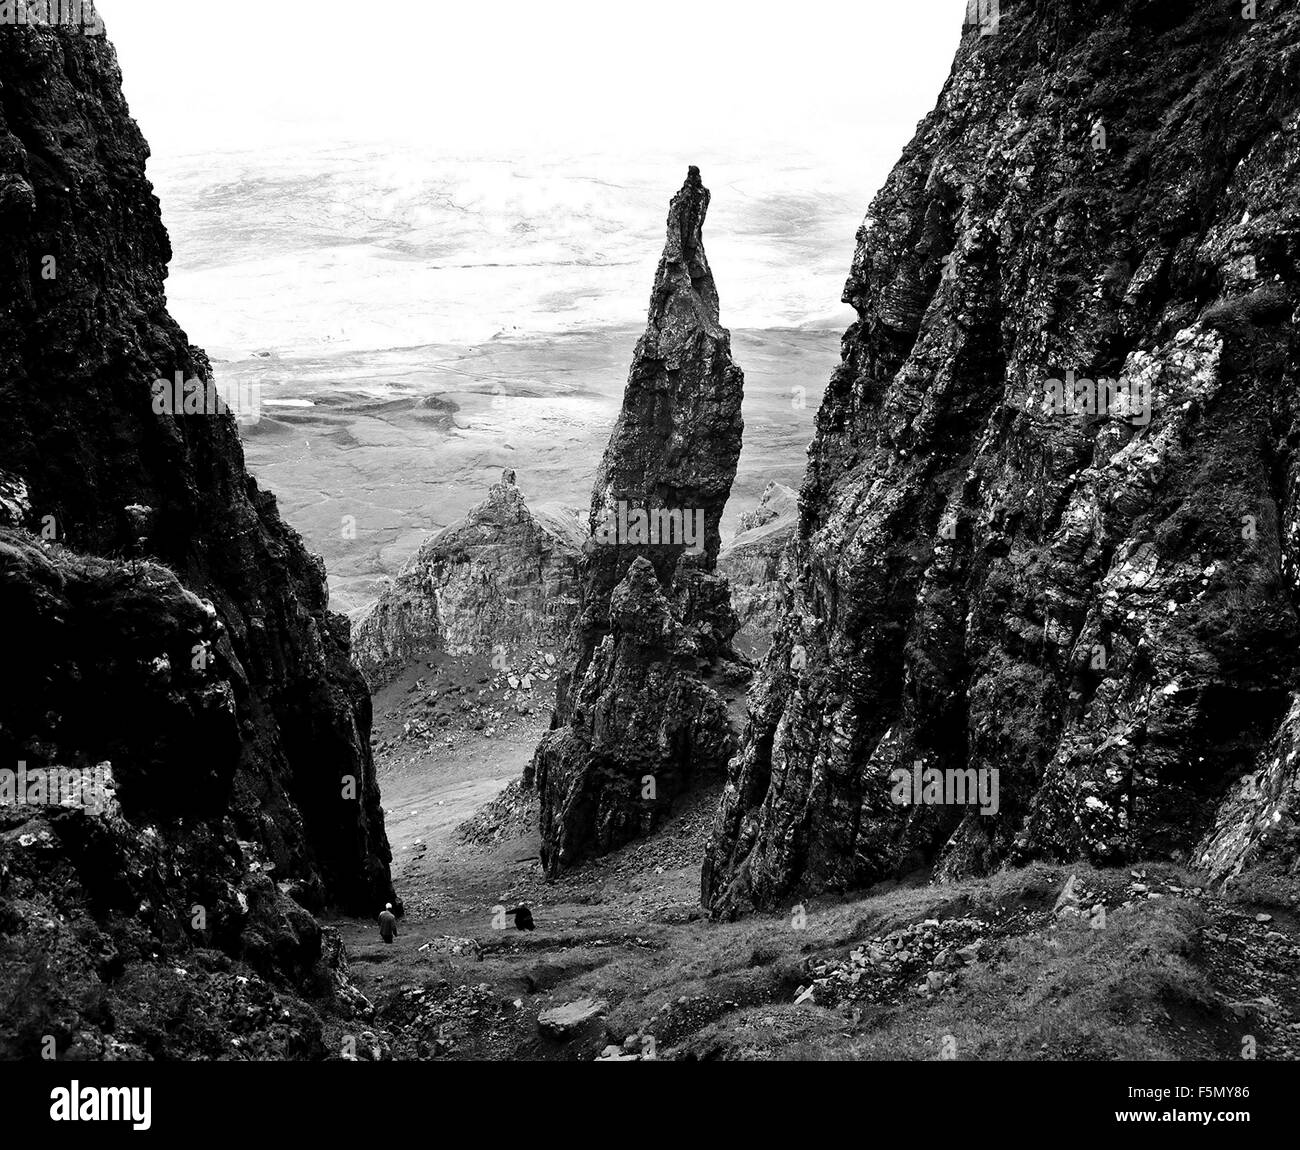 Nov 14, 2005; Skye, SCOTLAND; The Quirang Rock formation. The landslide at the Quirang is the largest mass movement slide in Britain, extending over 2km in width ( Near the Old Man of Stor). The Isle of Skye, usually known simply as Skye (An t-Eilean Sgitheanach in Scottish Gaelic) is the largest and most northerly island in the Inner Hebrides of Scotland. Skye is the second largest island in Scotland after Lewis and Harris. The island has some of the most dramatic and challenging mountain terrain in Scotland, including the Cuillin, as well as a rich heritage of ancient monuments, castles, and Stock Photo